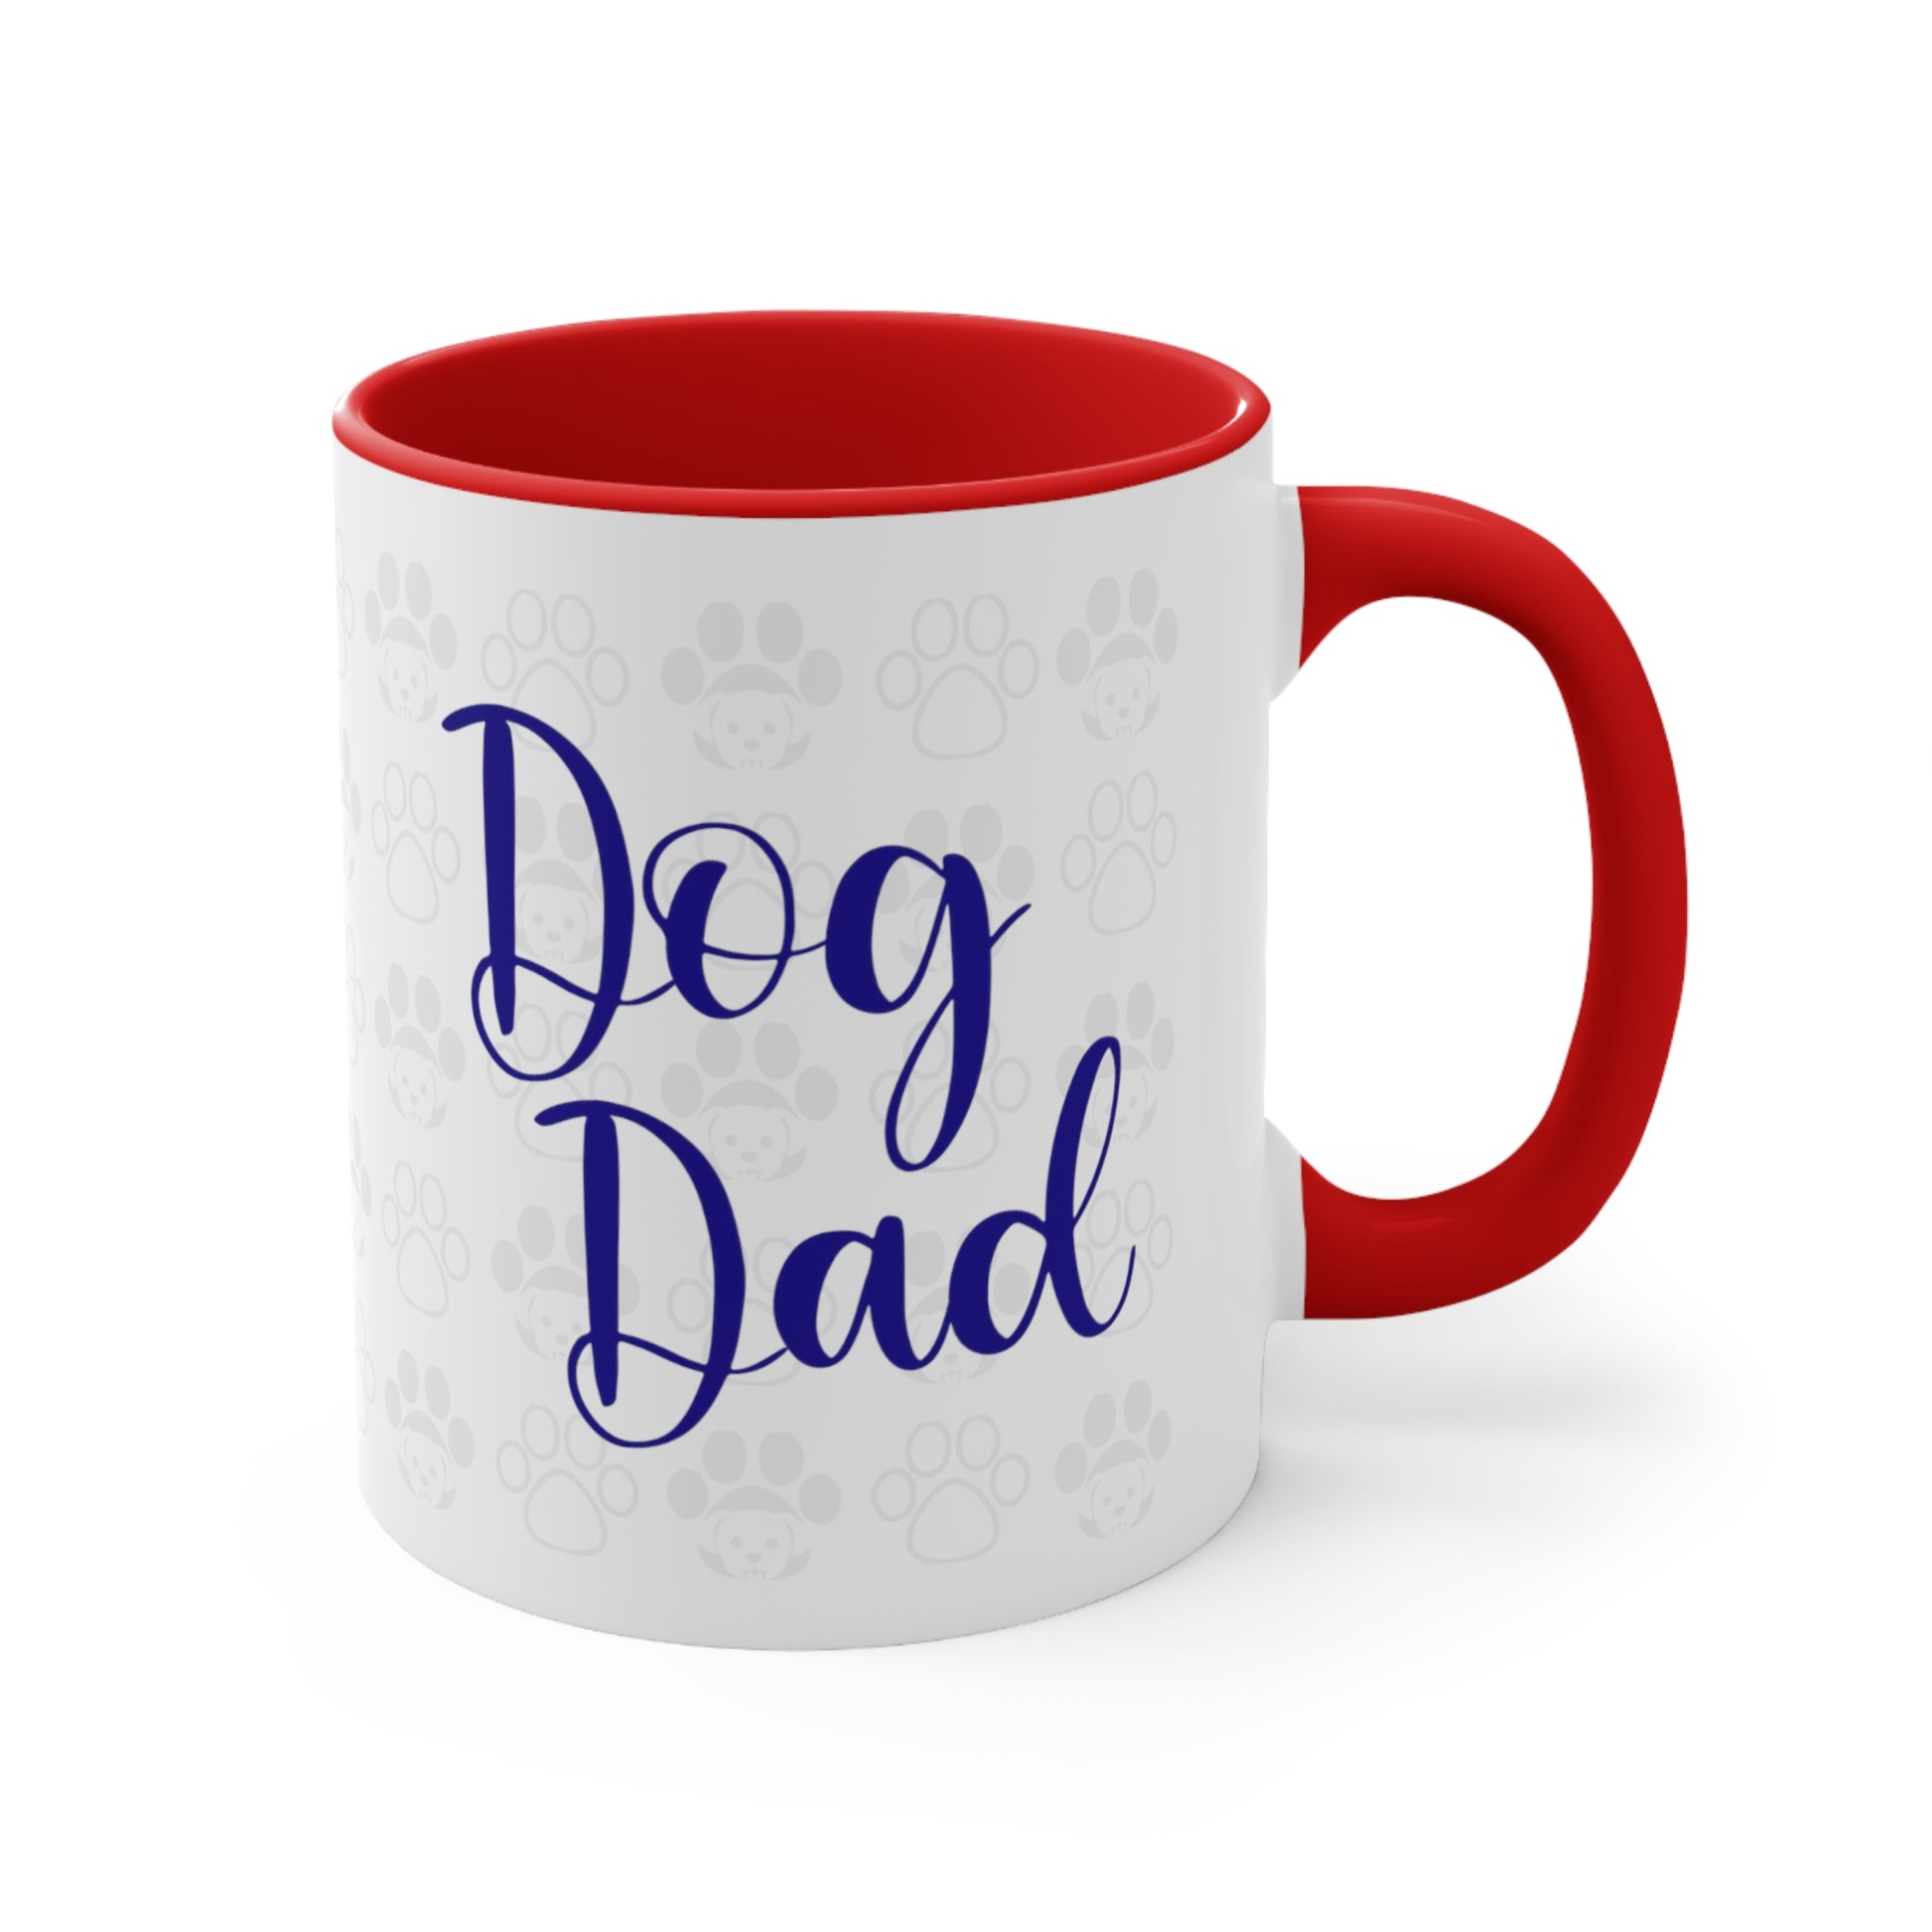 Dog Dad coffee Mug 11 oz, front view in red.